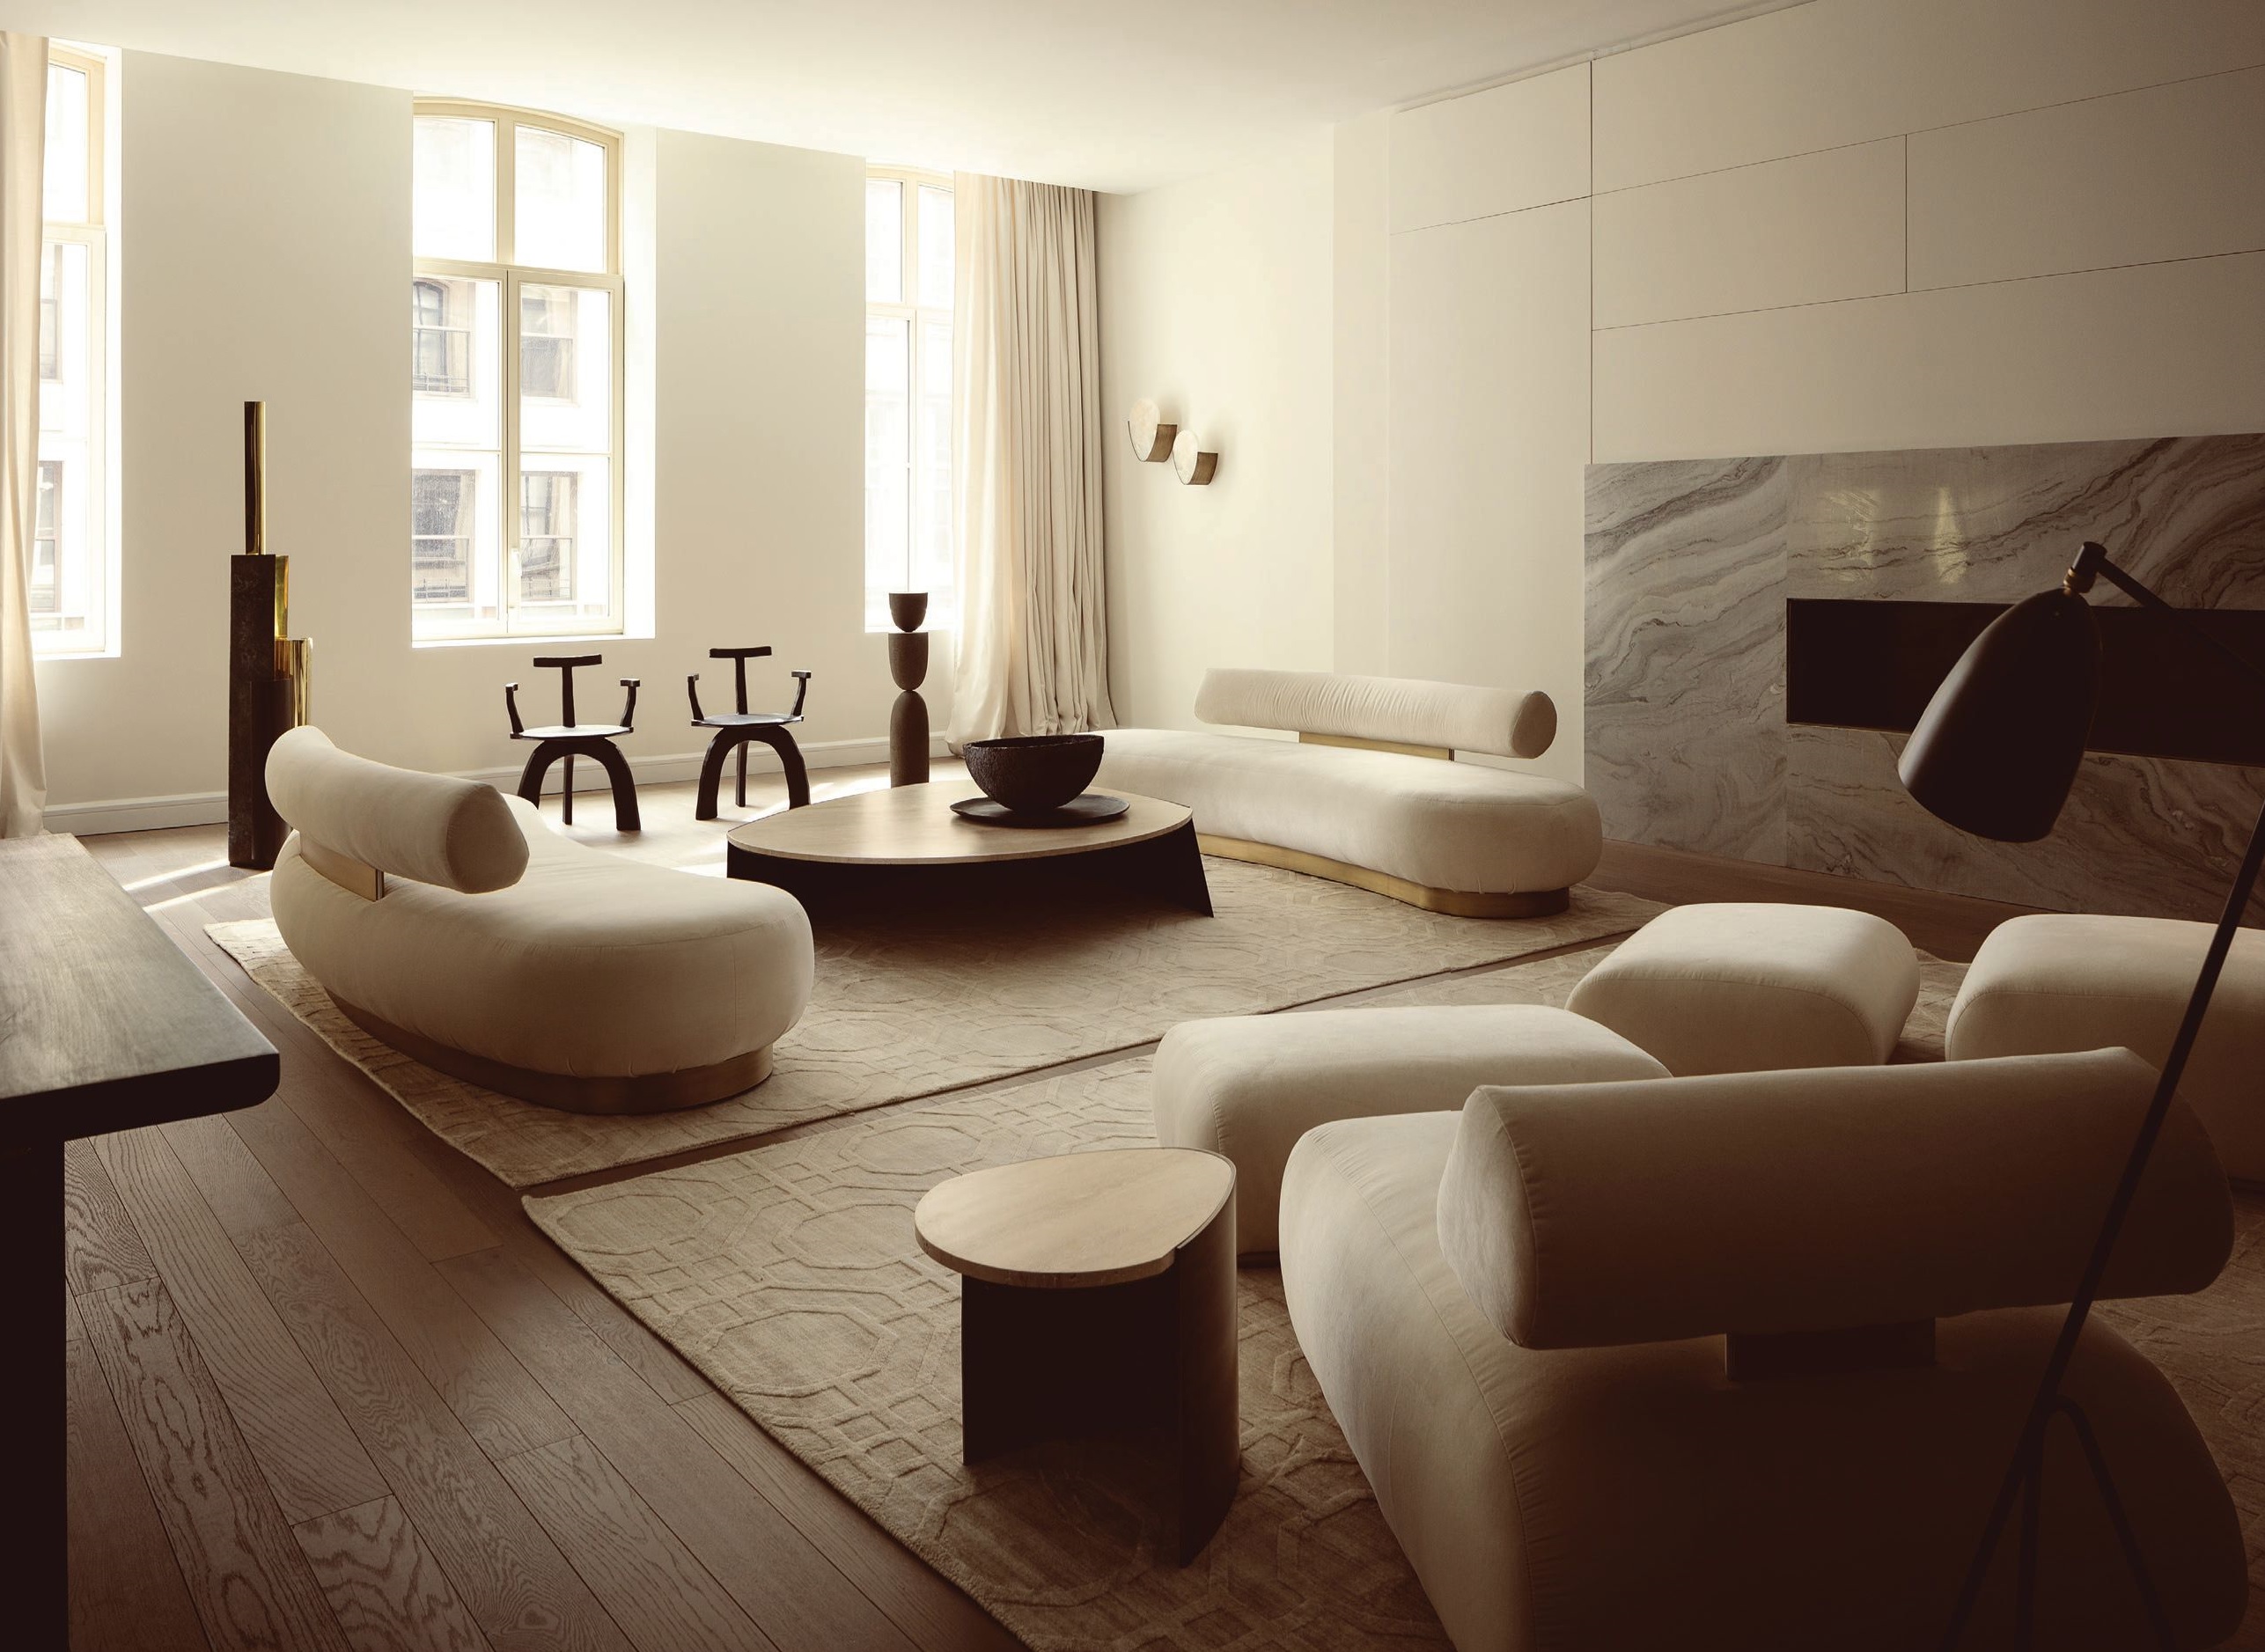 In the living room, custom sofas and tables by Atra. PHOTO COURTESY OF ATRA